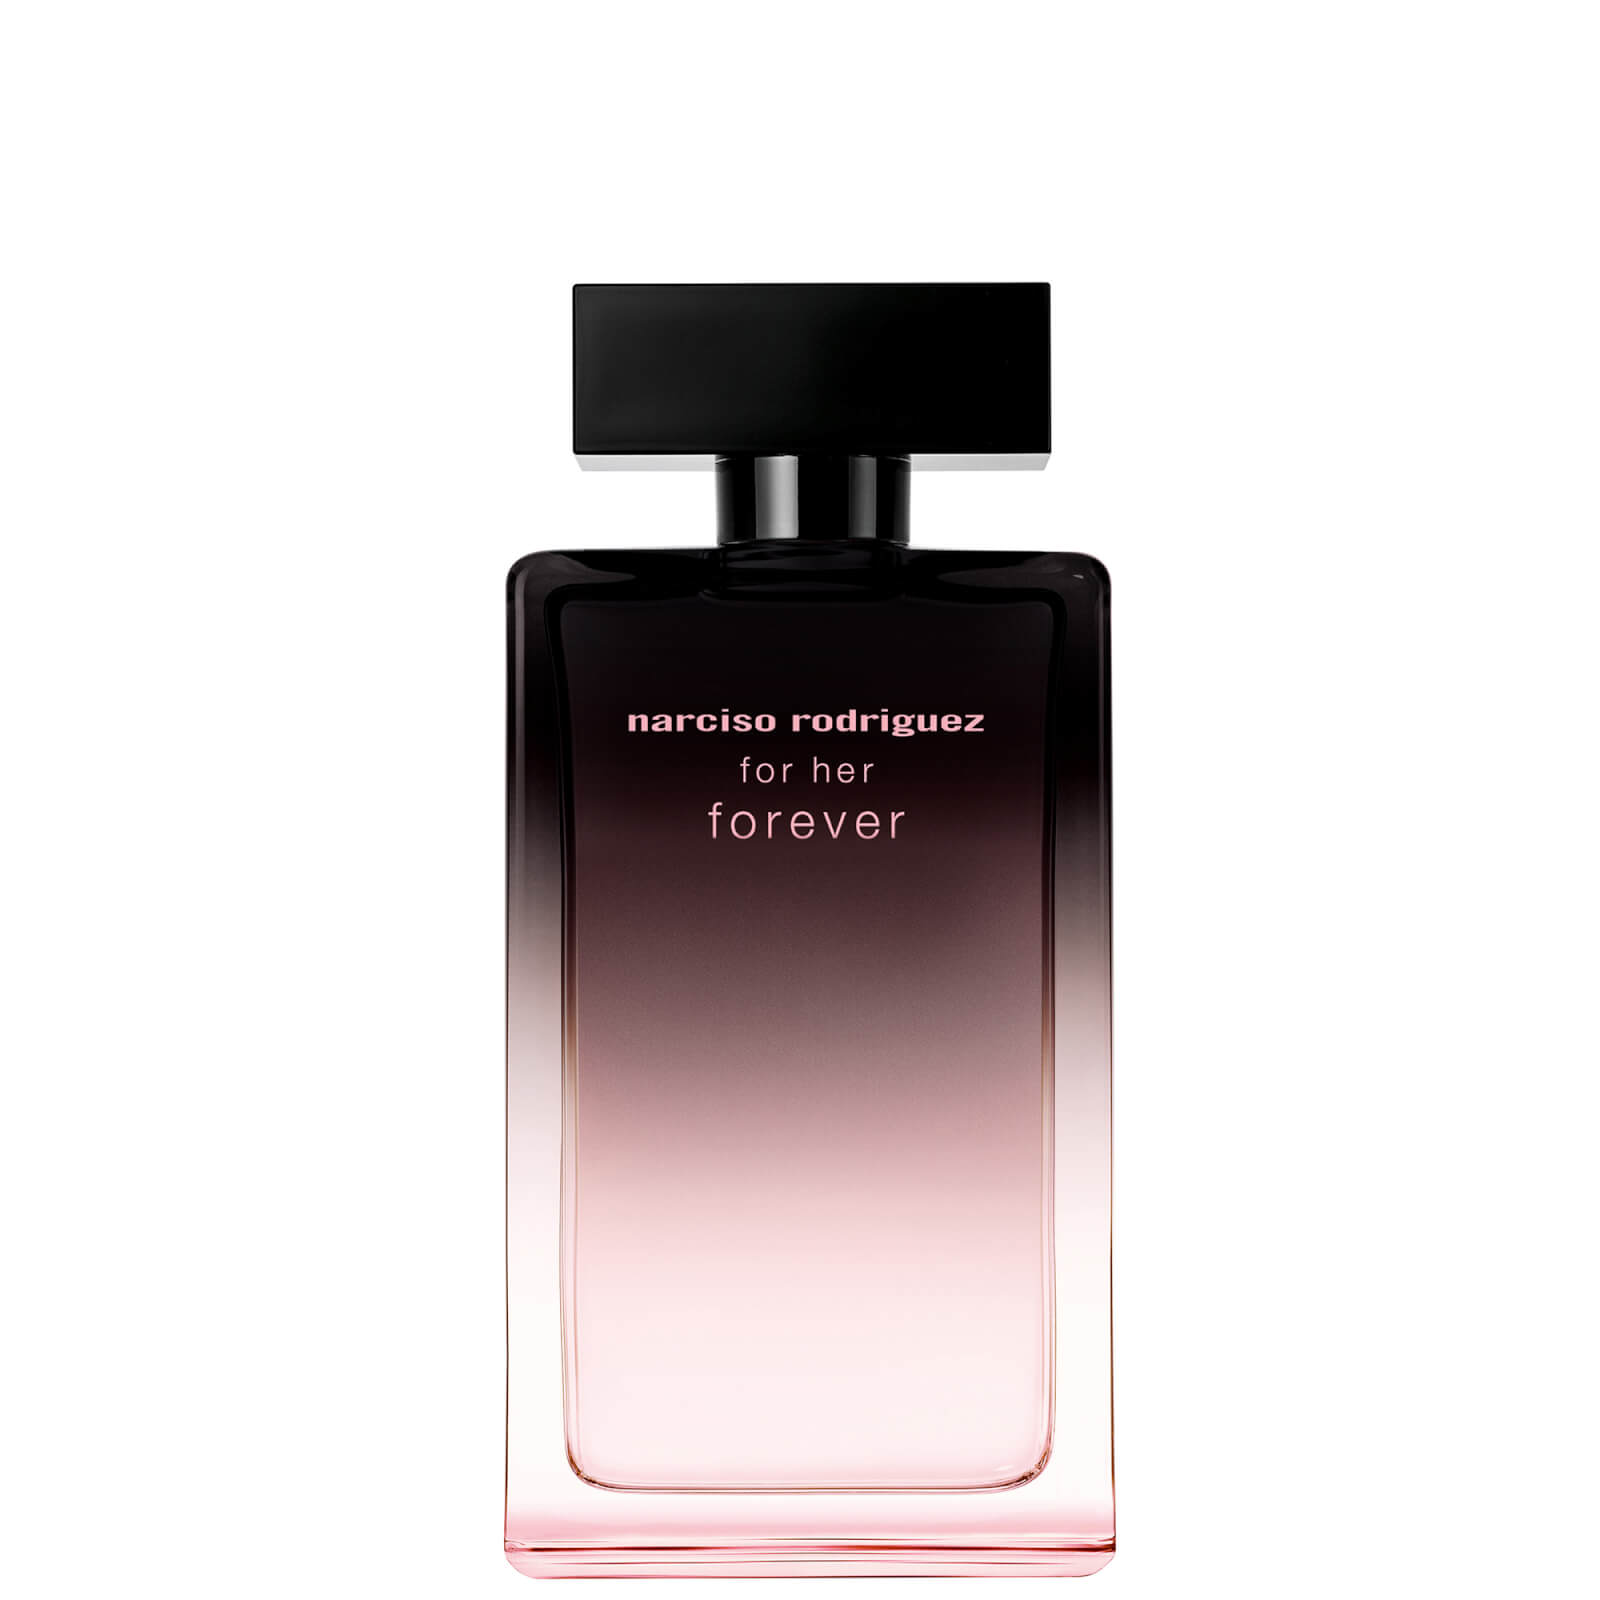 Image of Narciso Rodriguez for Her Forever Eau de Parfum Profumo 100ml